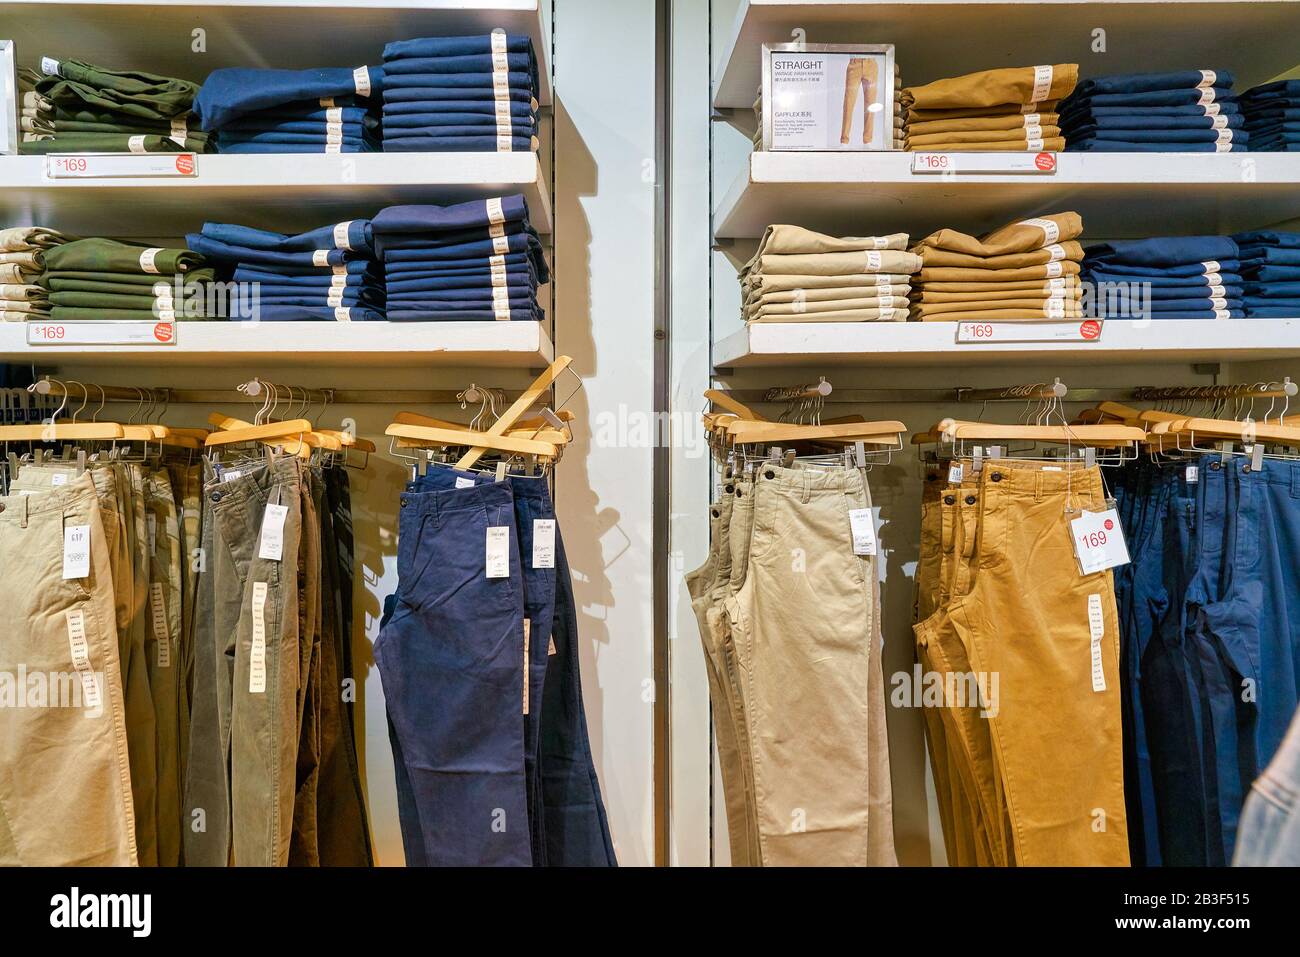 Gap 1969 brand jeans in a Gap store in New York on Monday, July 4